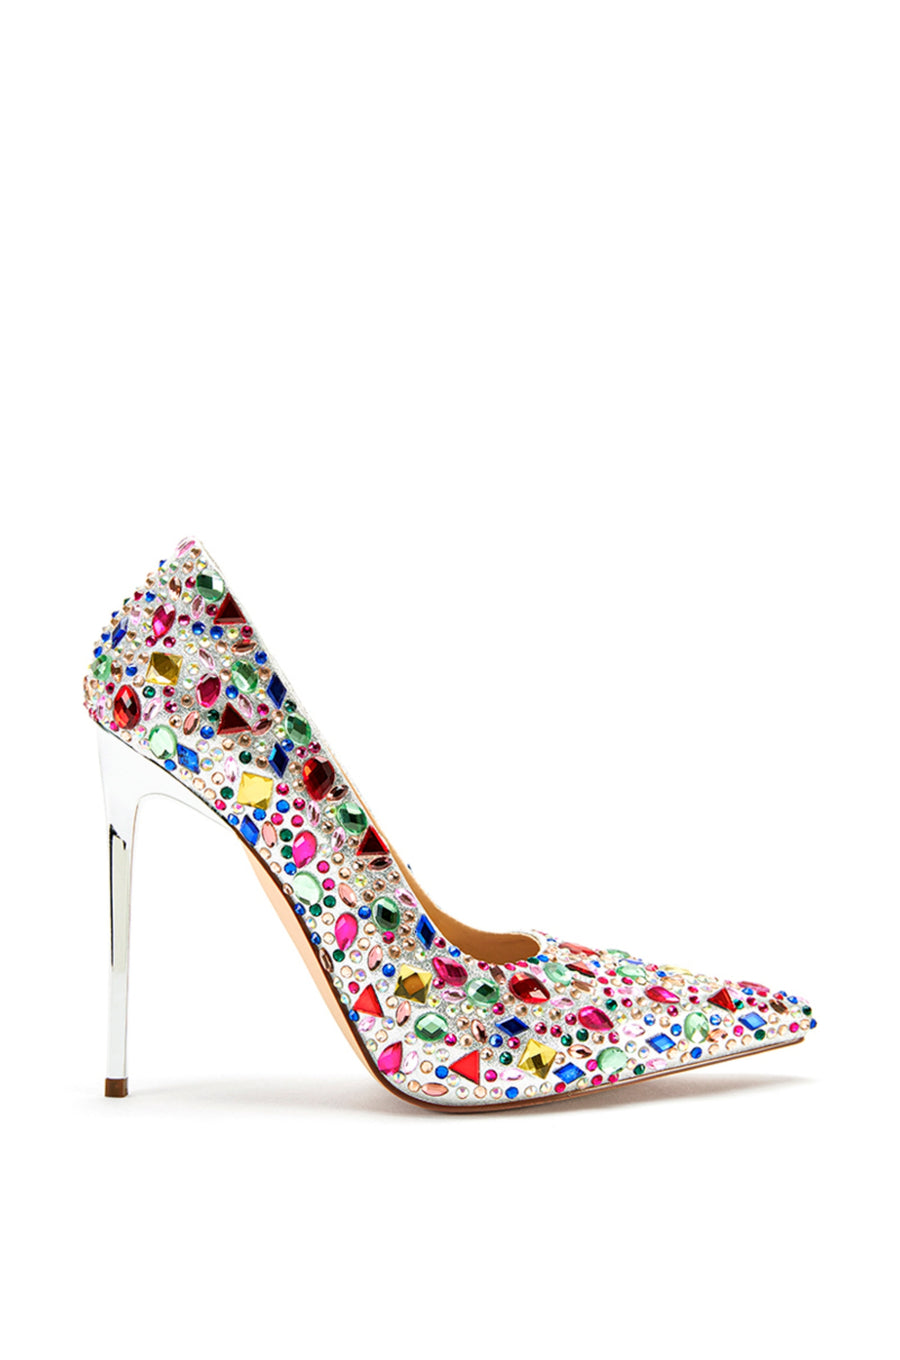 silver metallic pointed toe heels with multicolored rhinestone studs